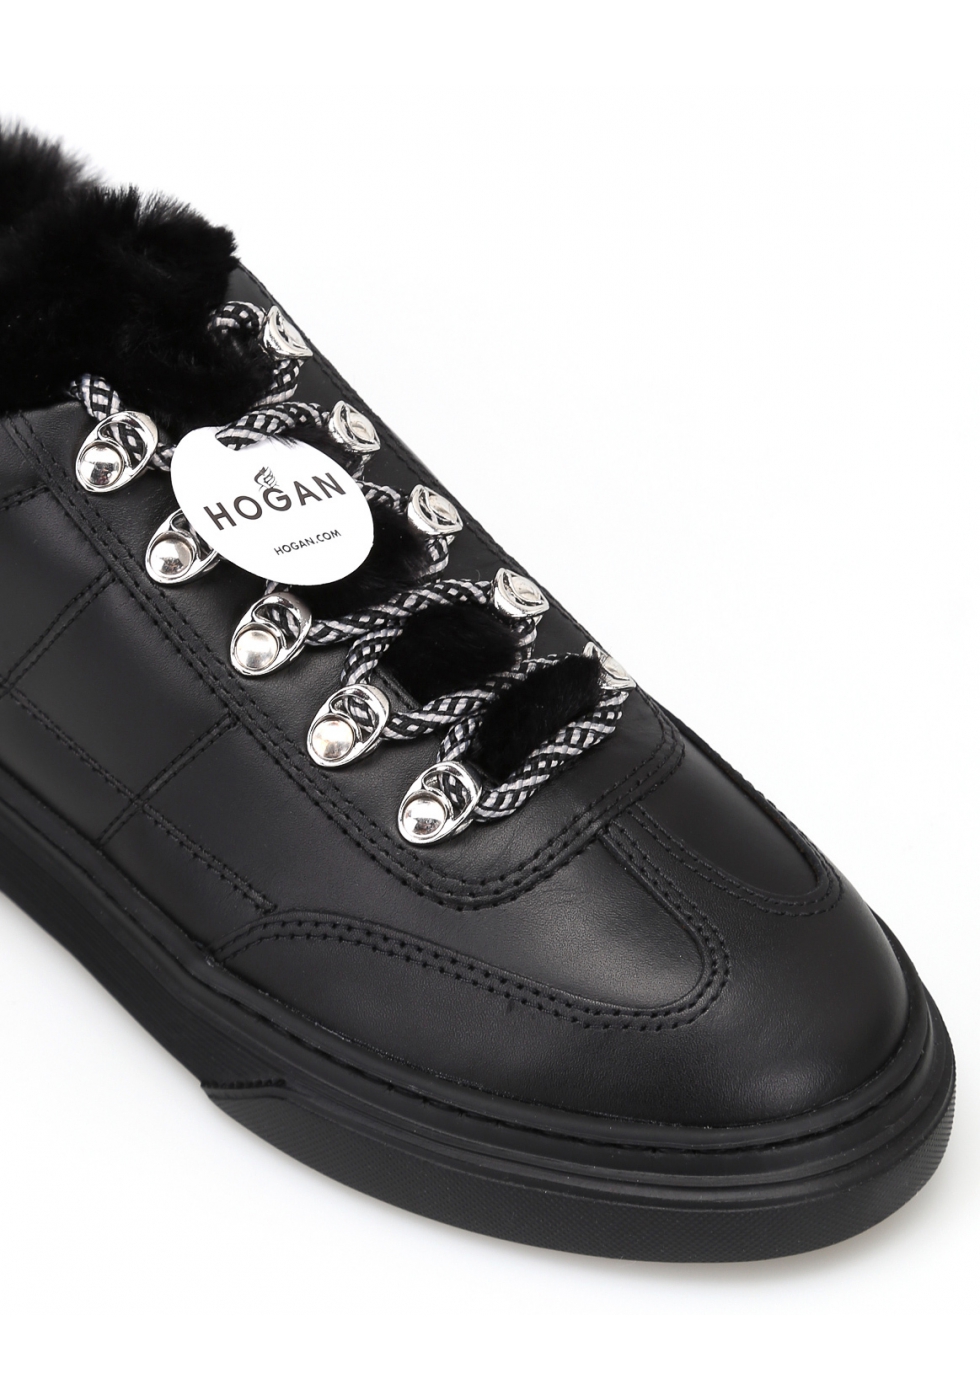 Hogan women's sneakers in black leather and faux fur - Italian Boutique